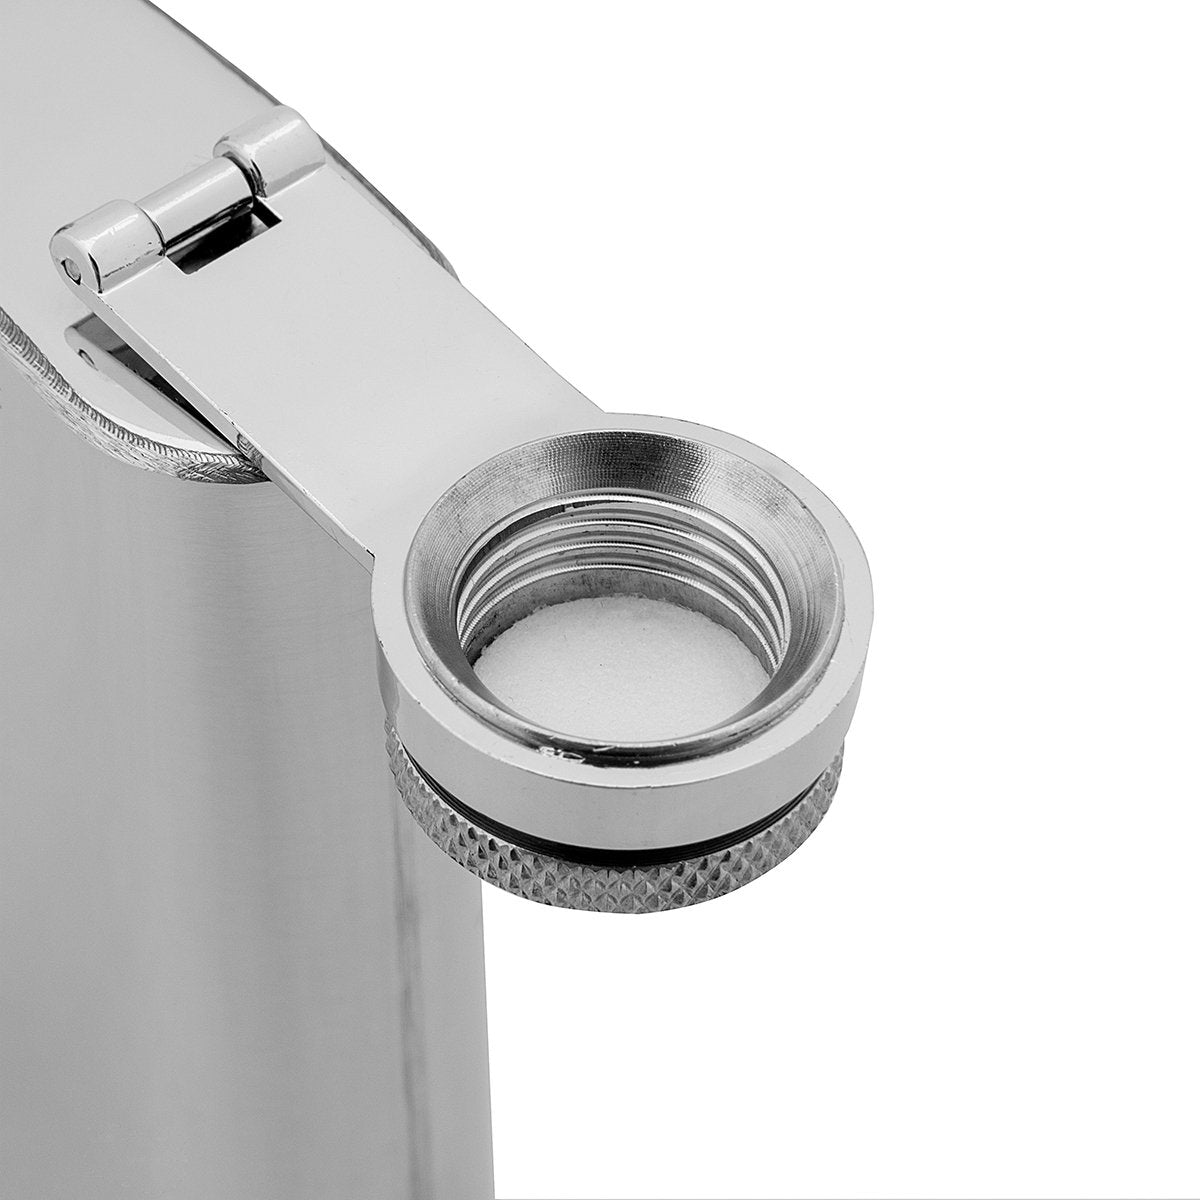 8 oz Silver Stainless Steel Hip Flask for Liquor